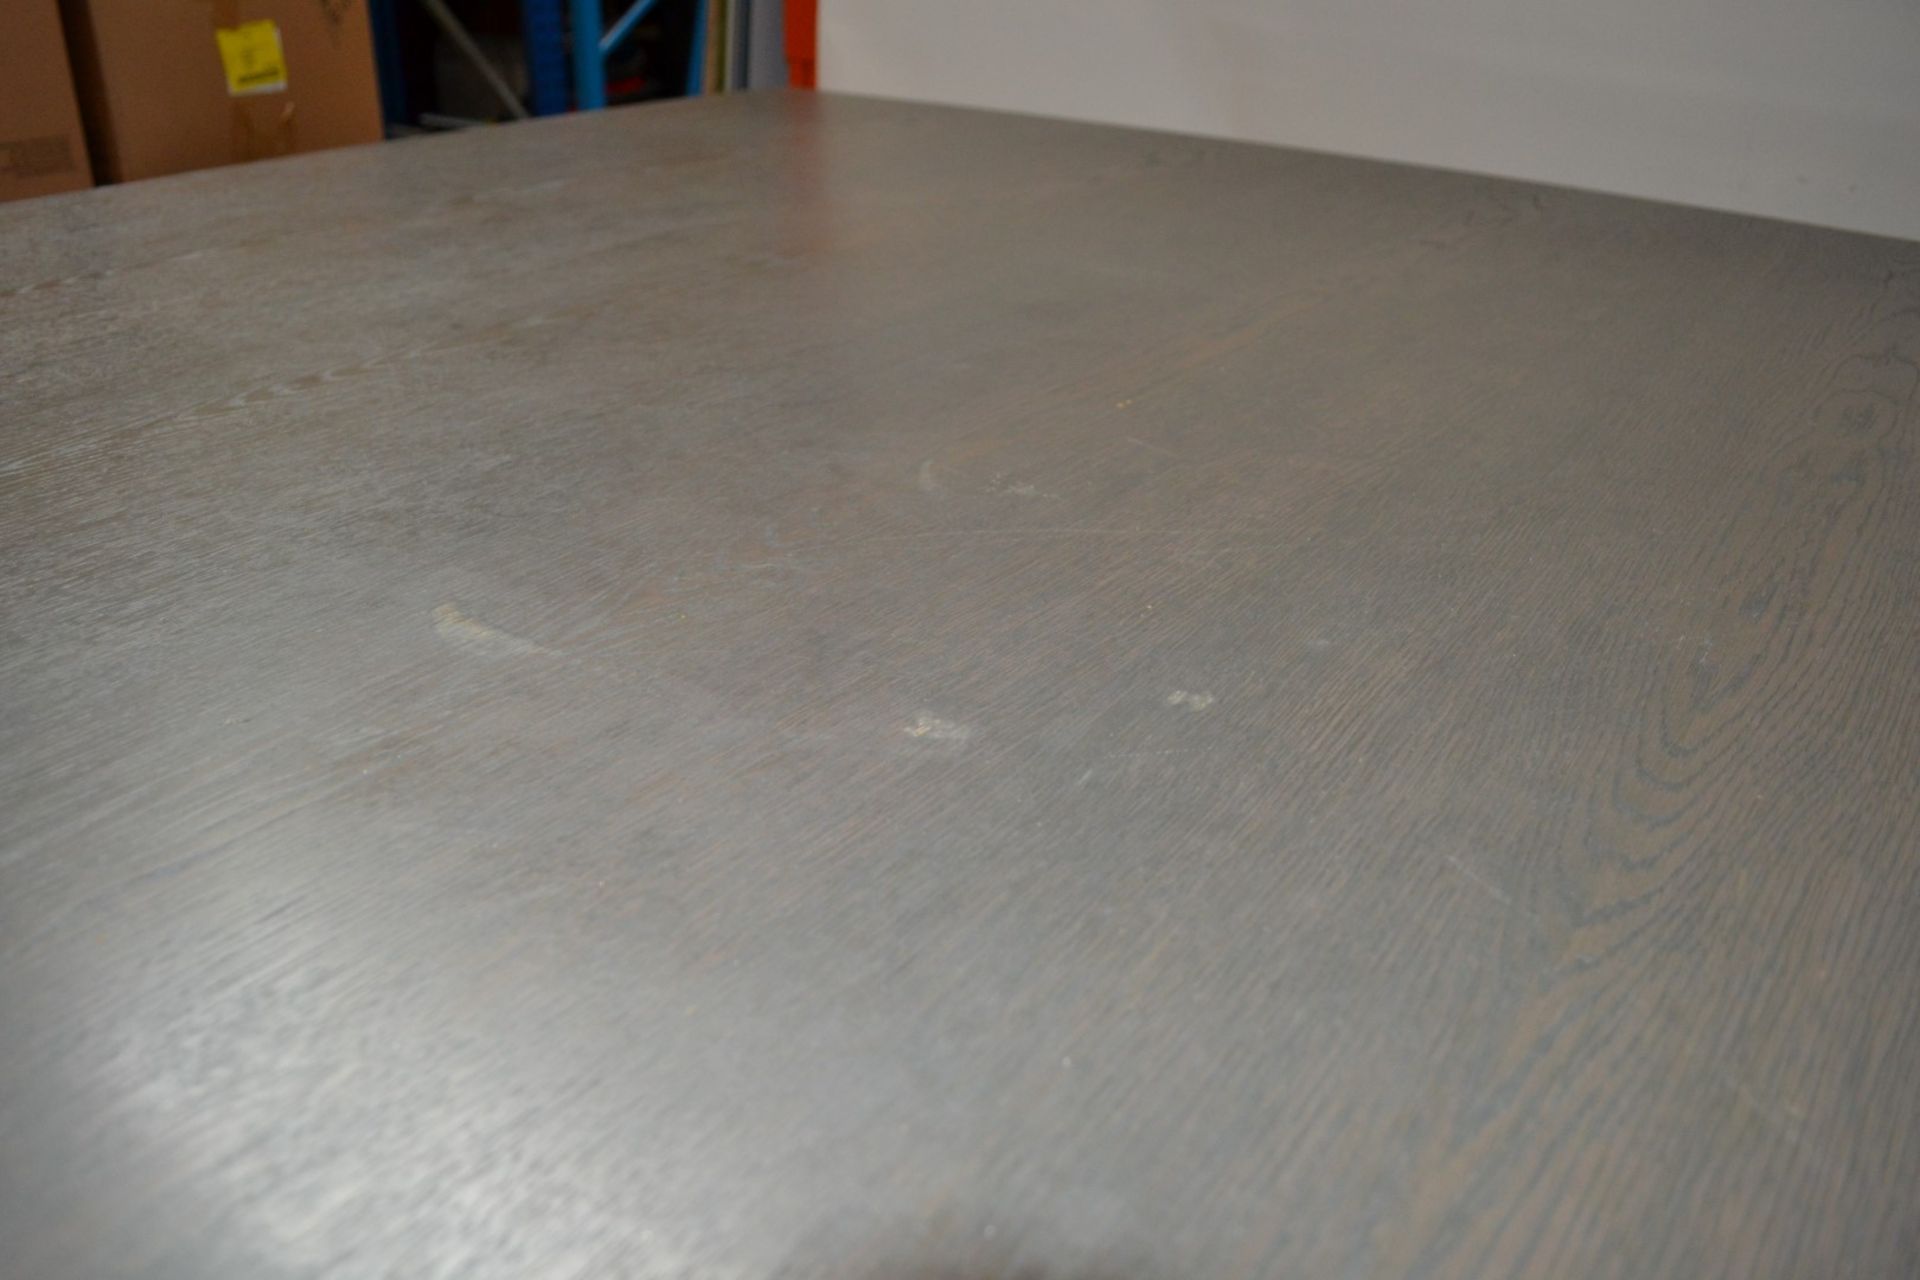 1 x Large Square Wooden Dining Table in a Grey Oak Coloured Finish - CL314 - Location: Altrincham - Image 5 of 10